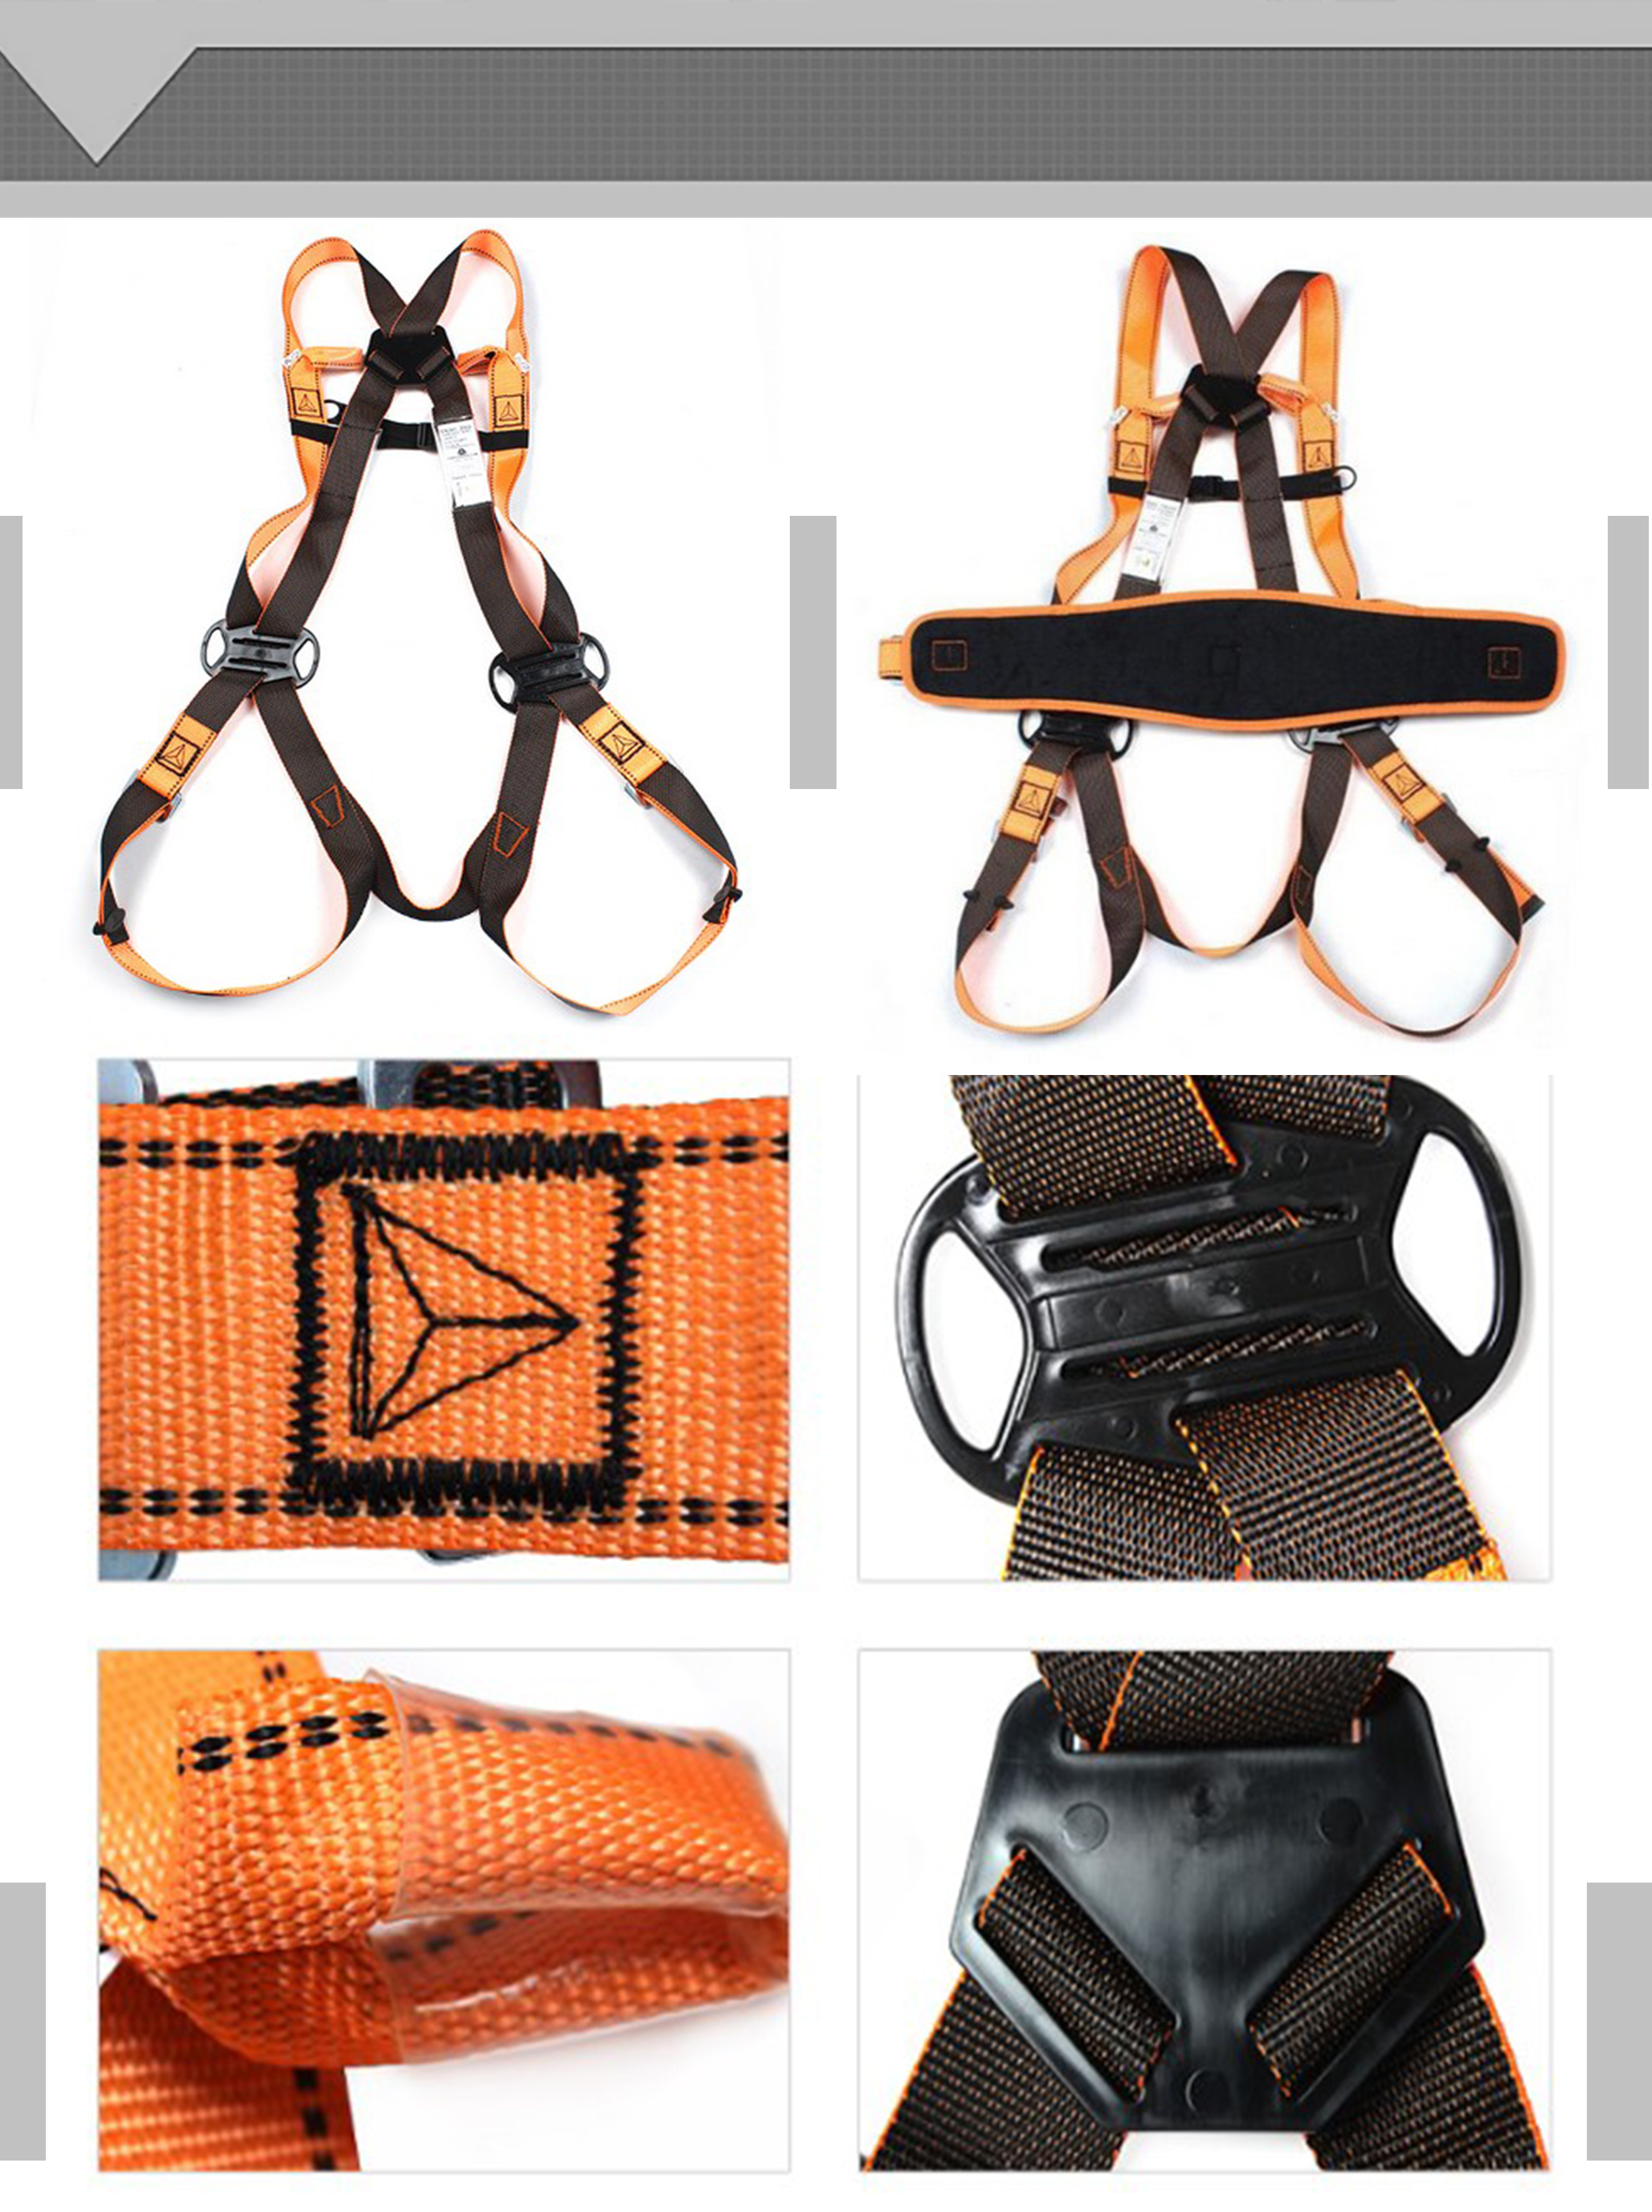 Construction safety with waist protector full body harness safety supplies